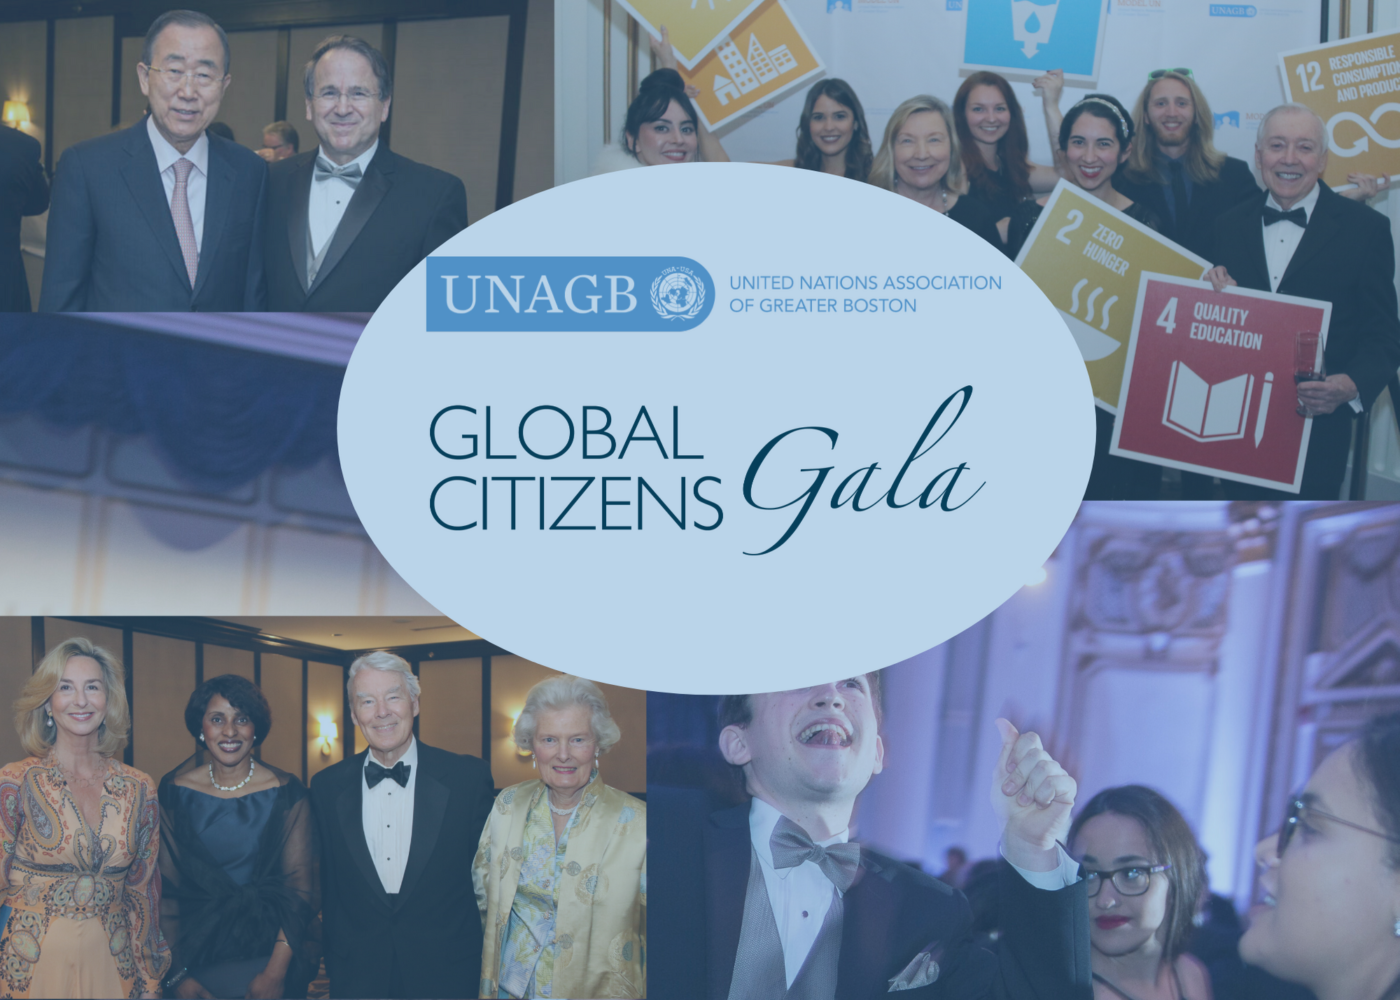 Global Citizens Gala United Nations Association of Greater Boston